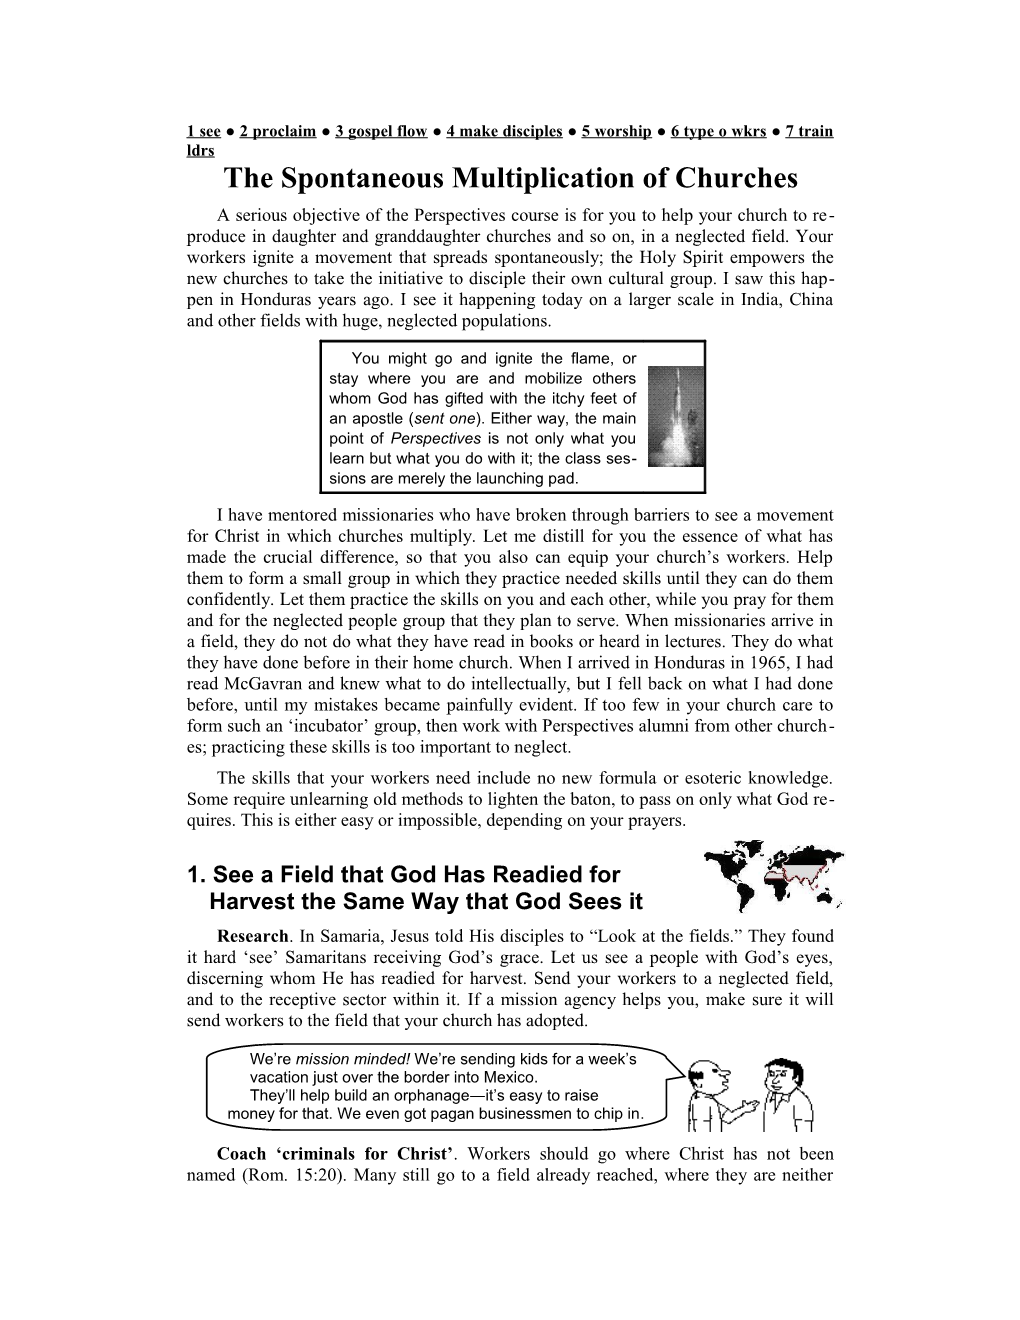 The Spontaneous Multiplication of Churches